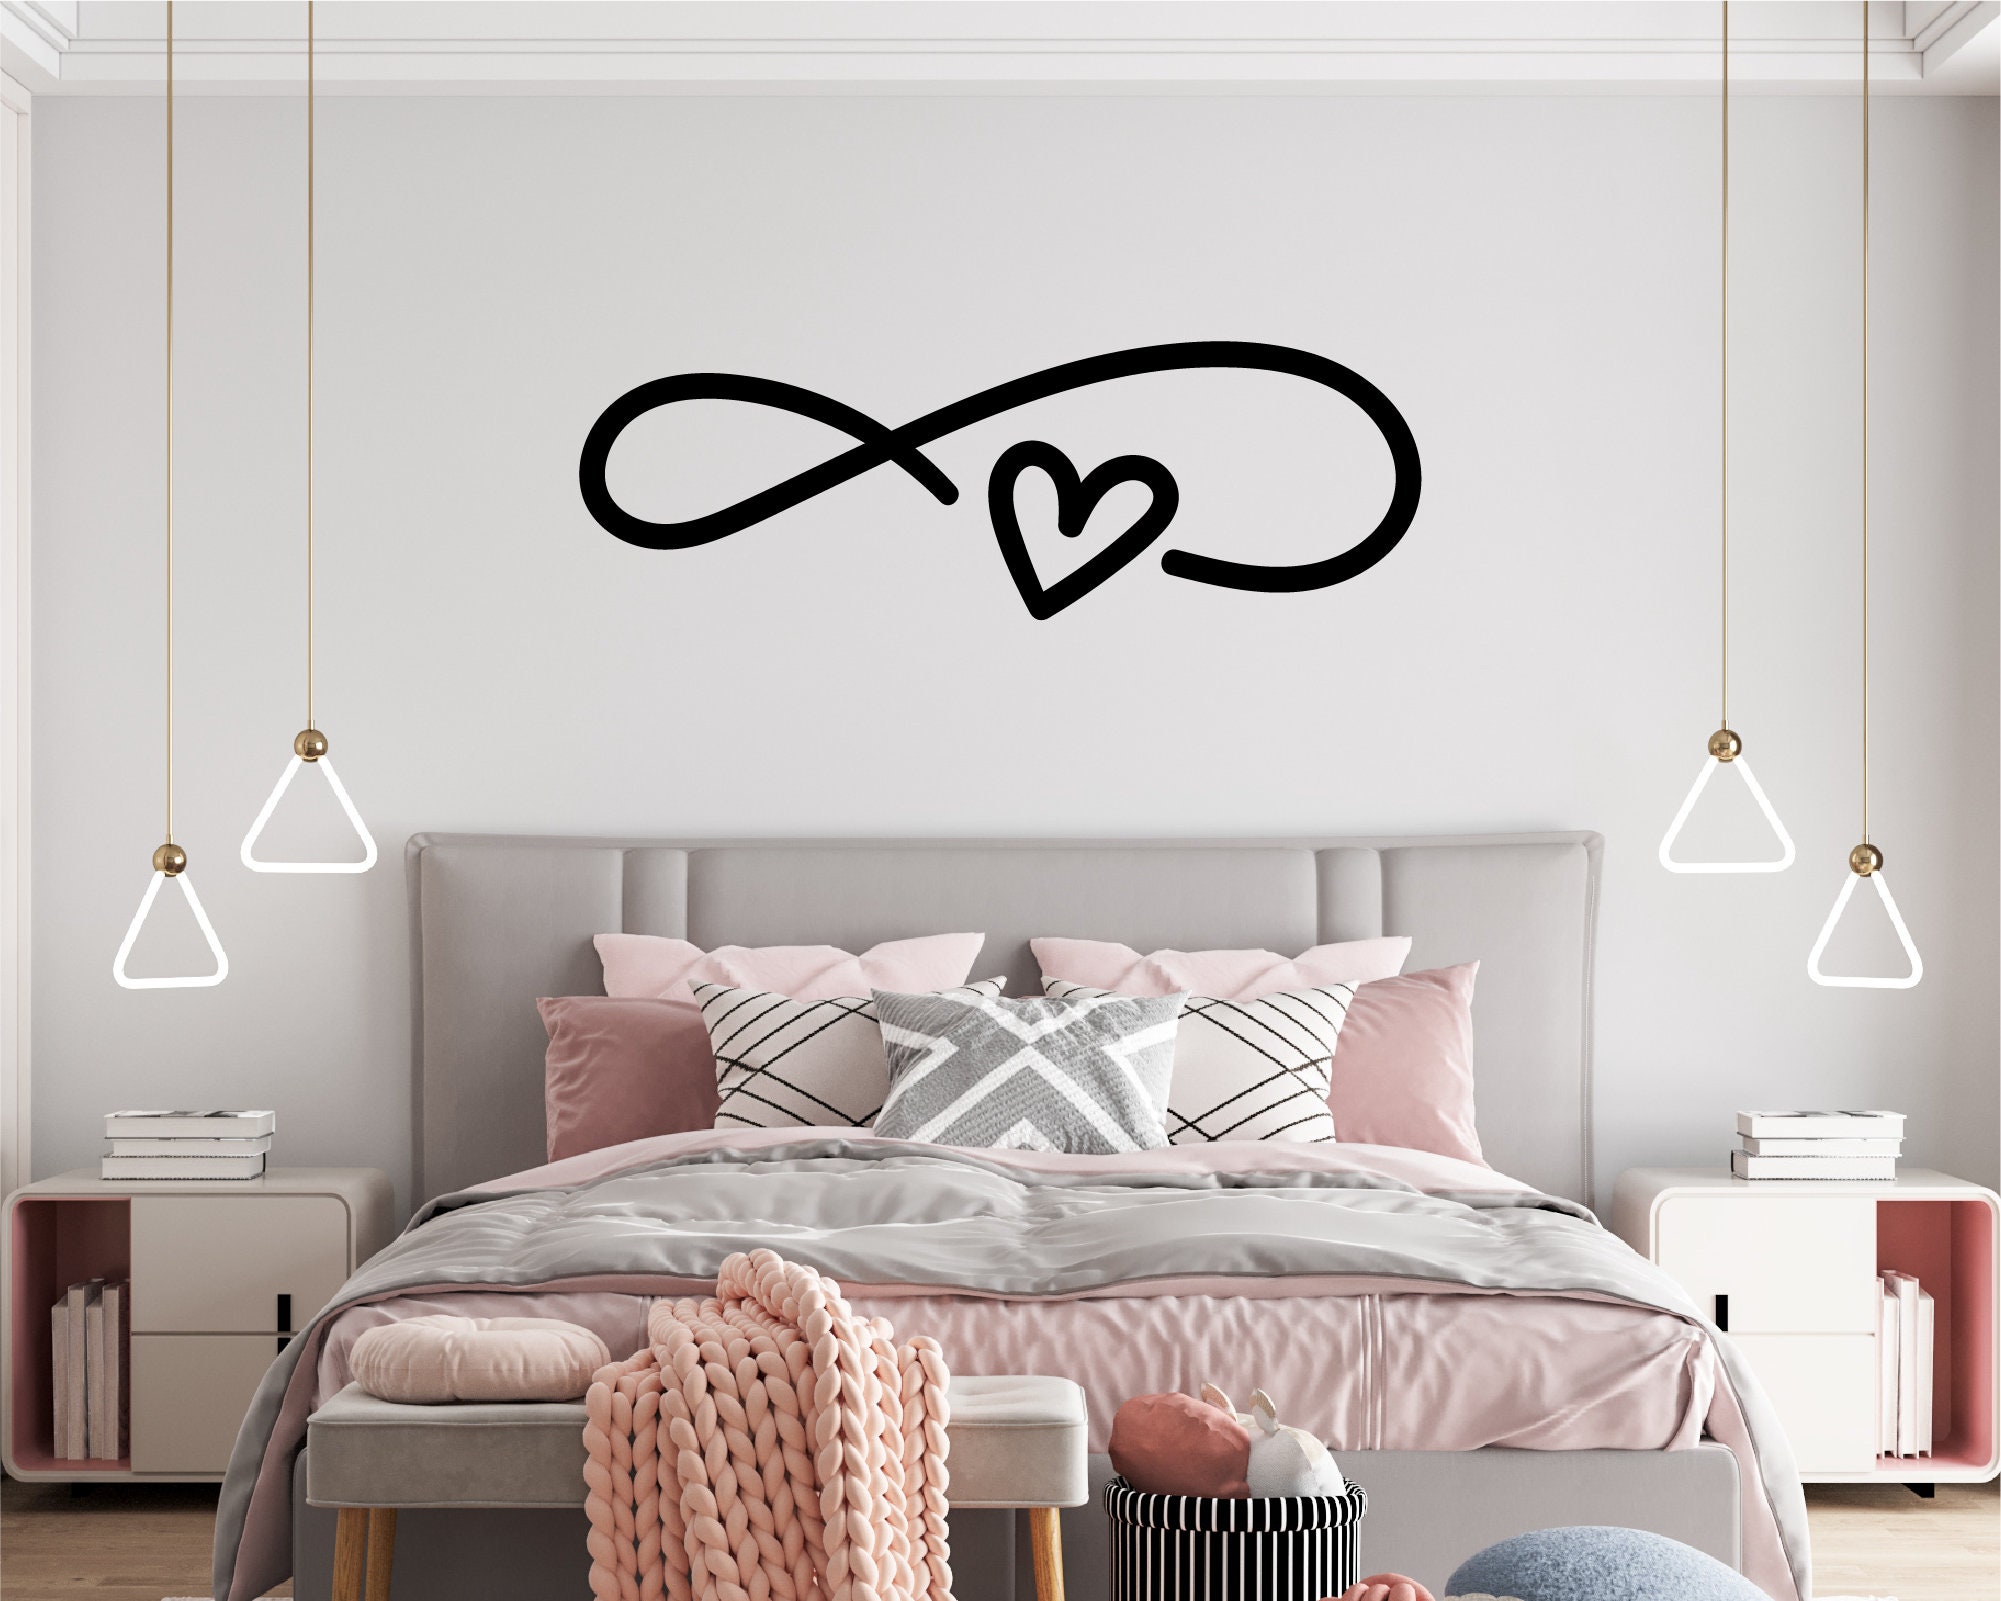 Decal, Infinity Bedroom Wall Wall Symbol Buy Wall Art, Infinity Online Heart Wall India Infinity Wedding in Sticker, - Decal Love Love Romantic Infinity Etsy Decal,